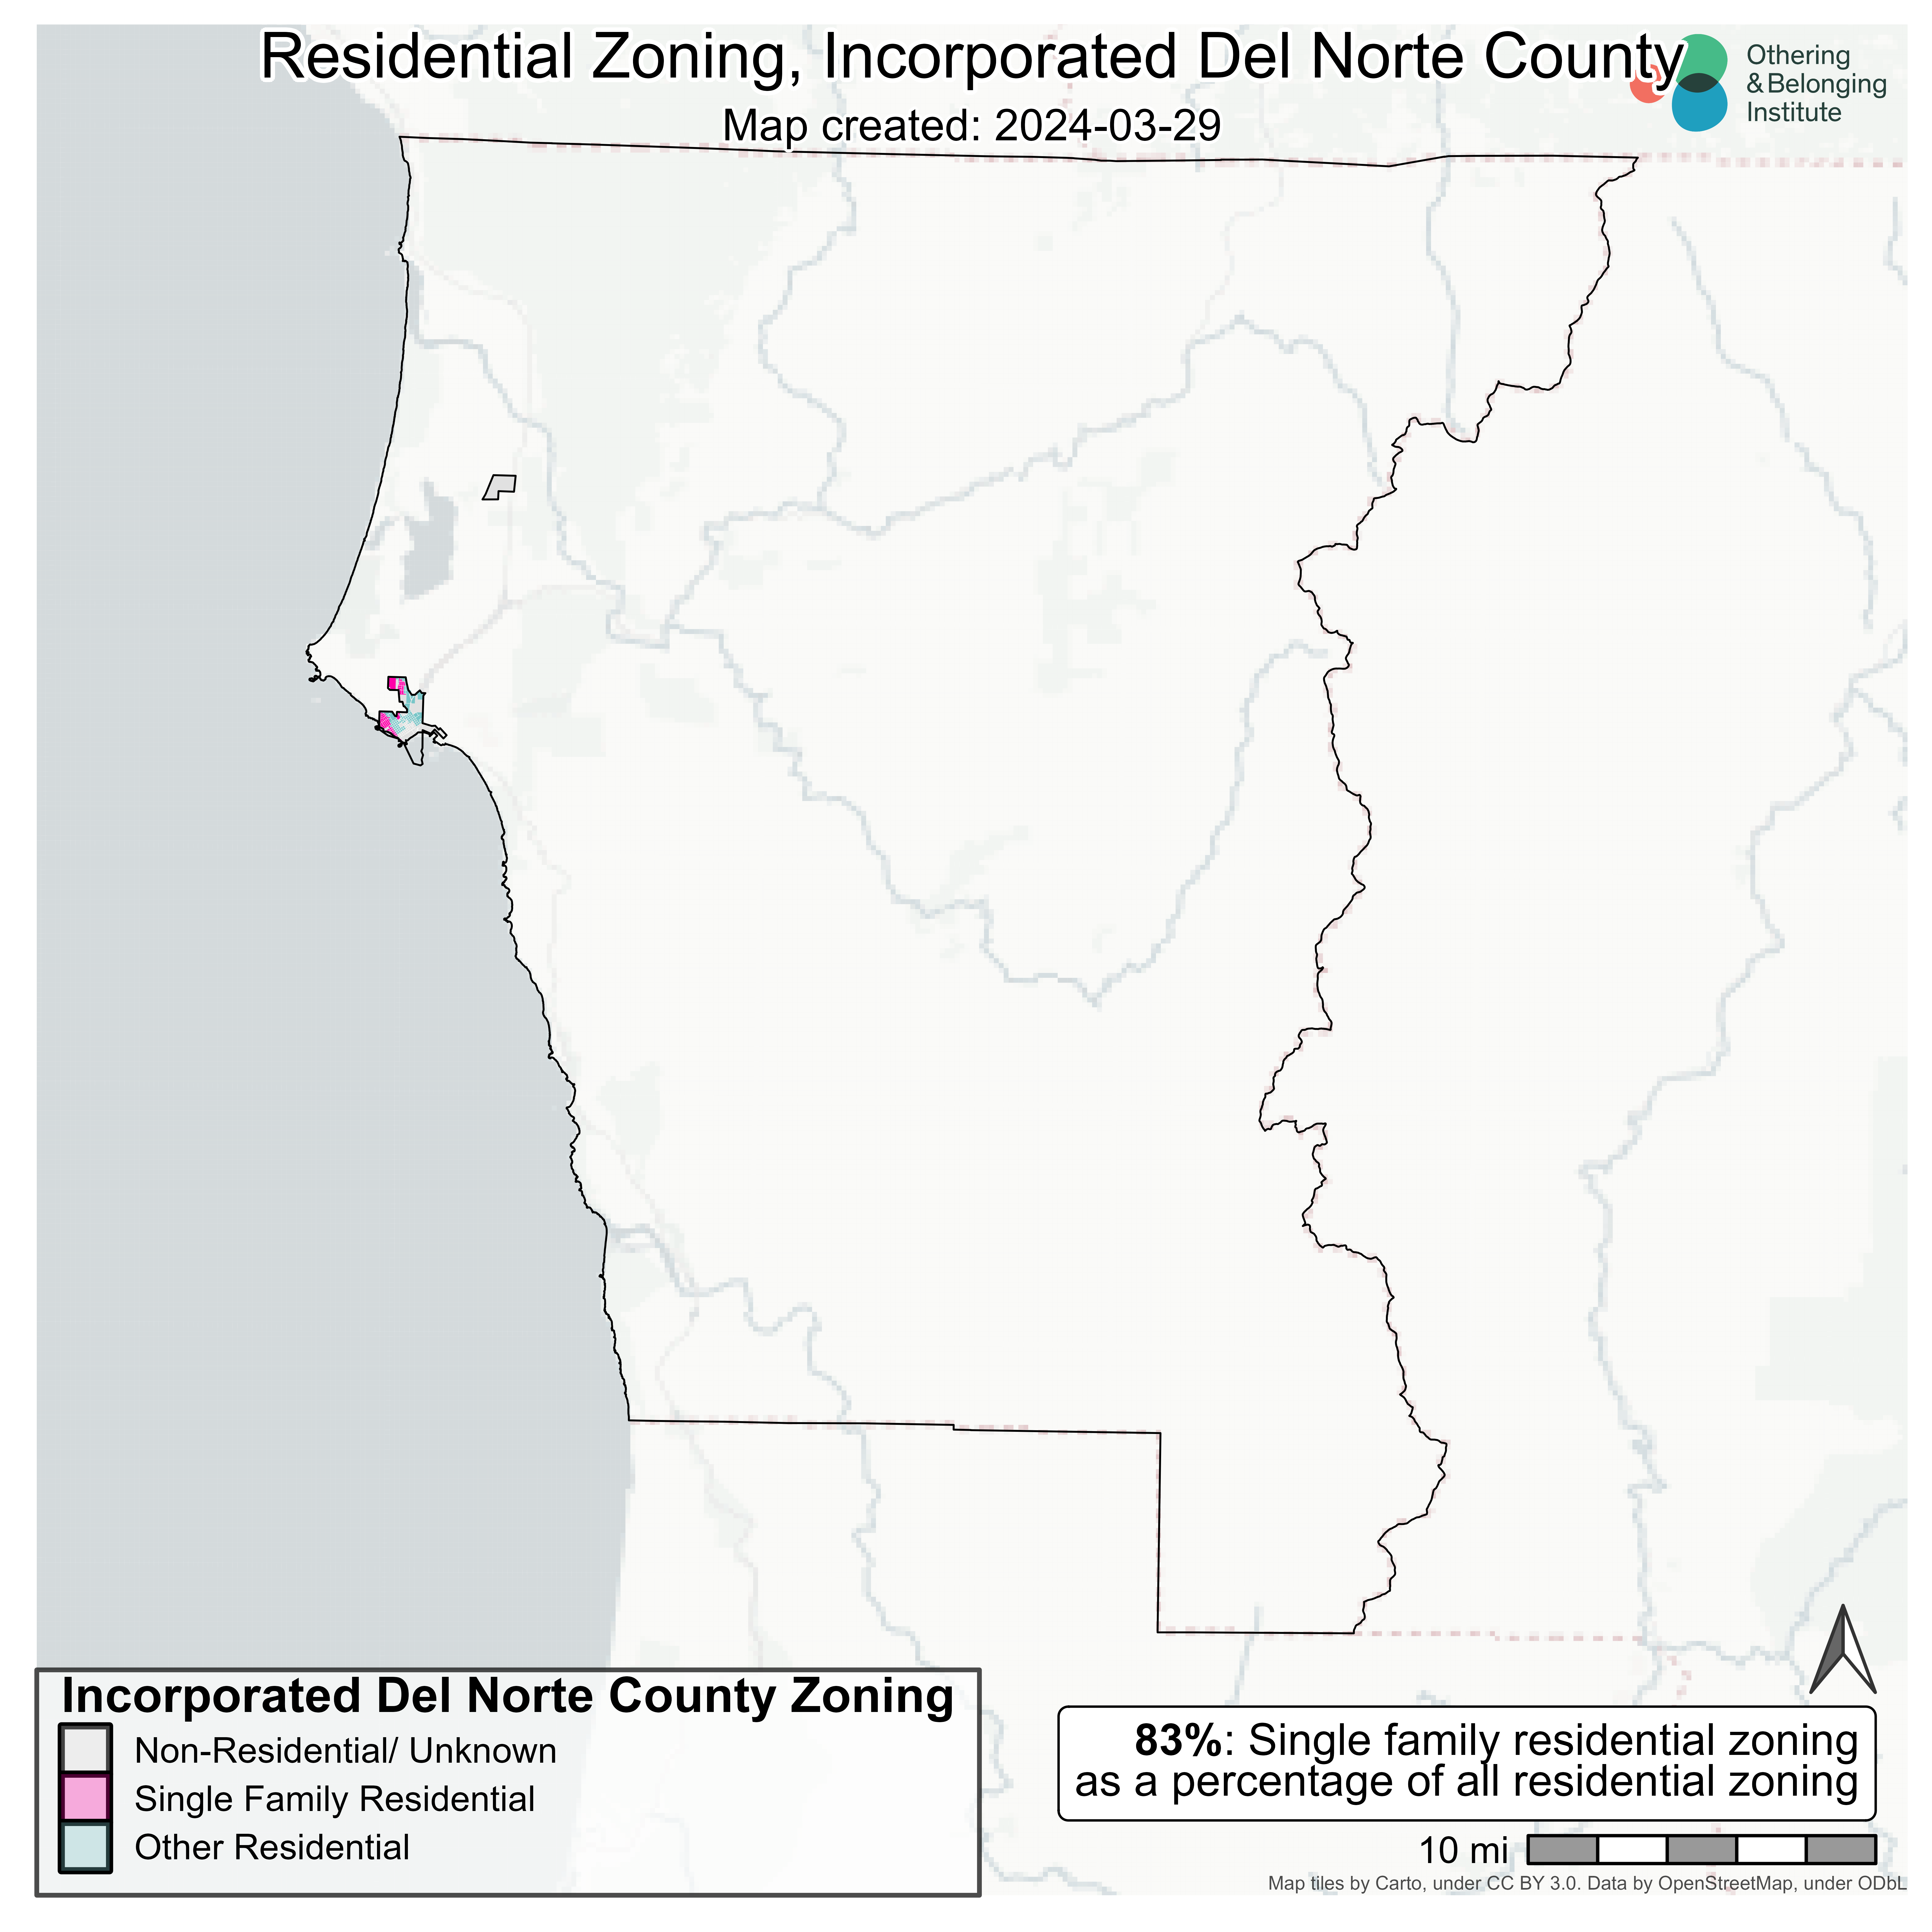 Incorporated Del Norte County zoning map